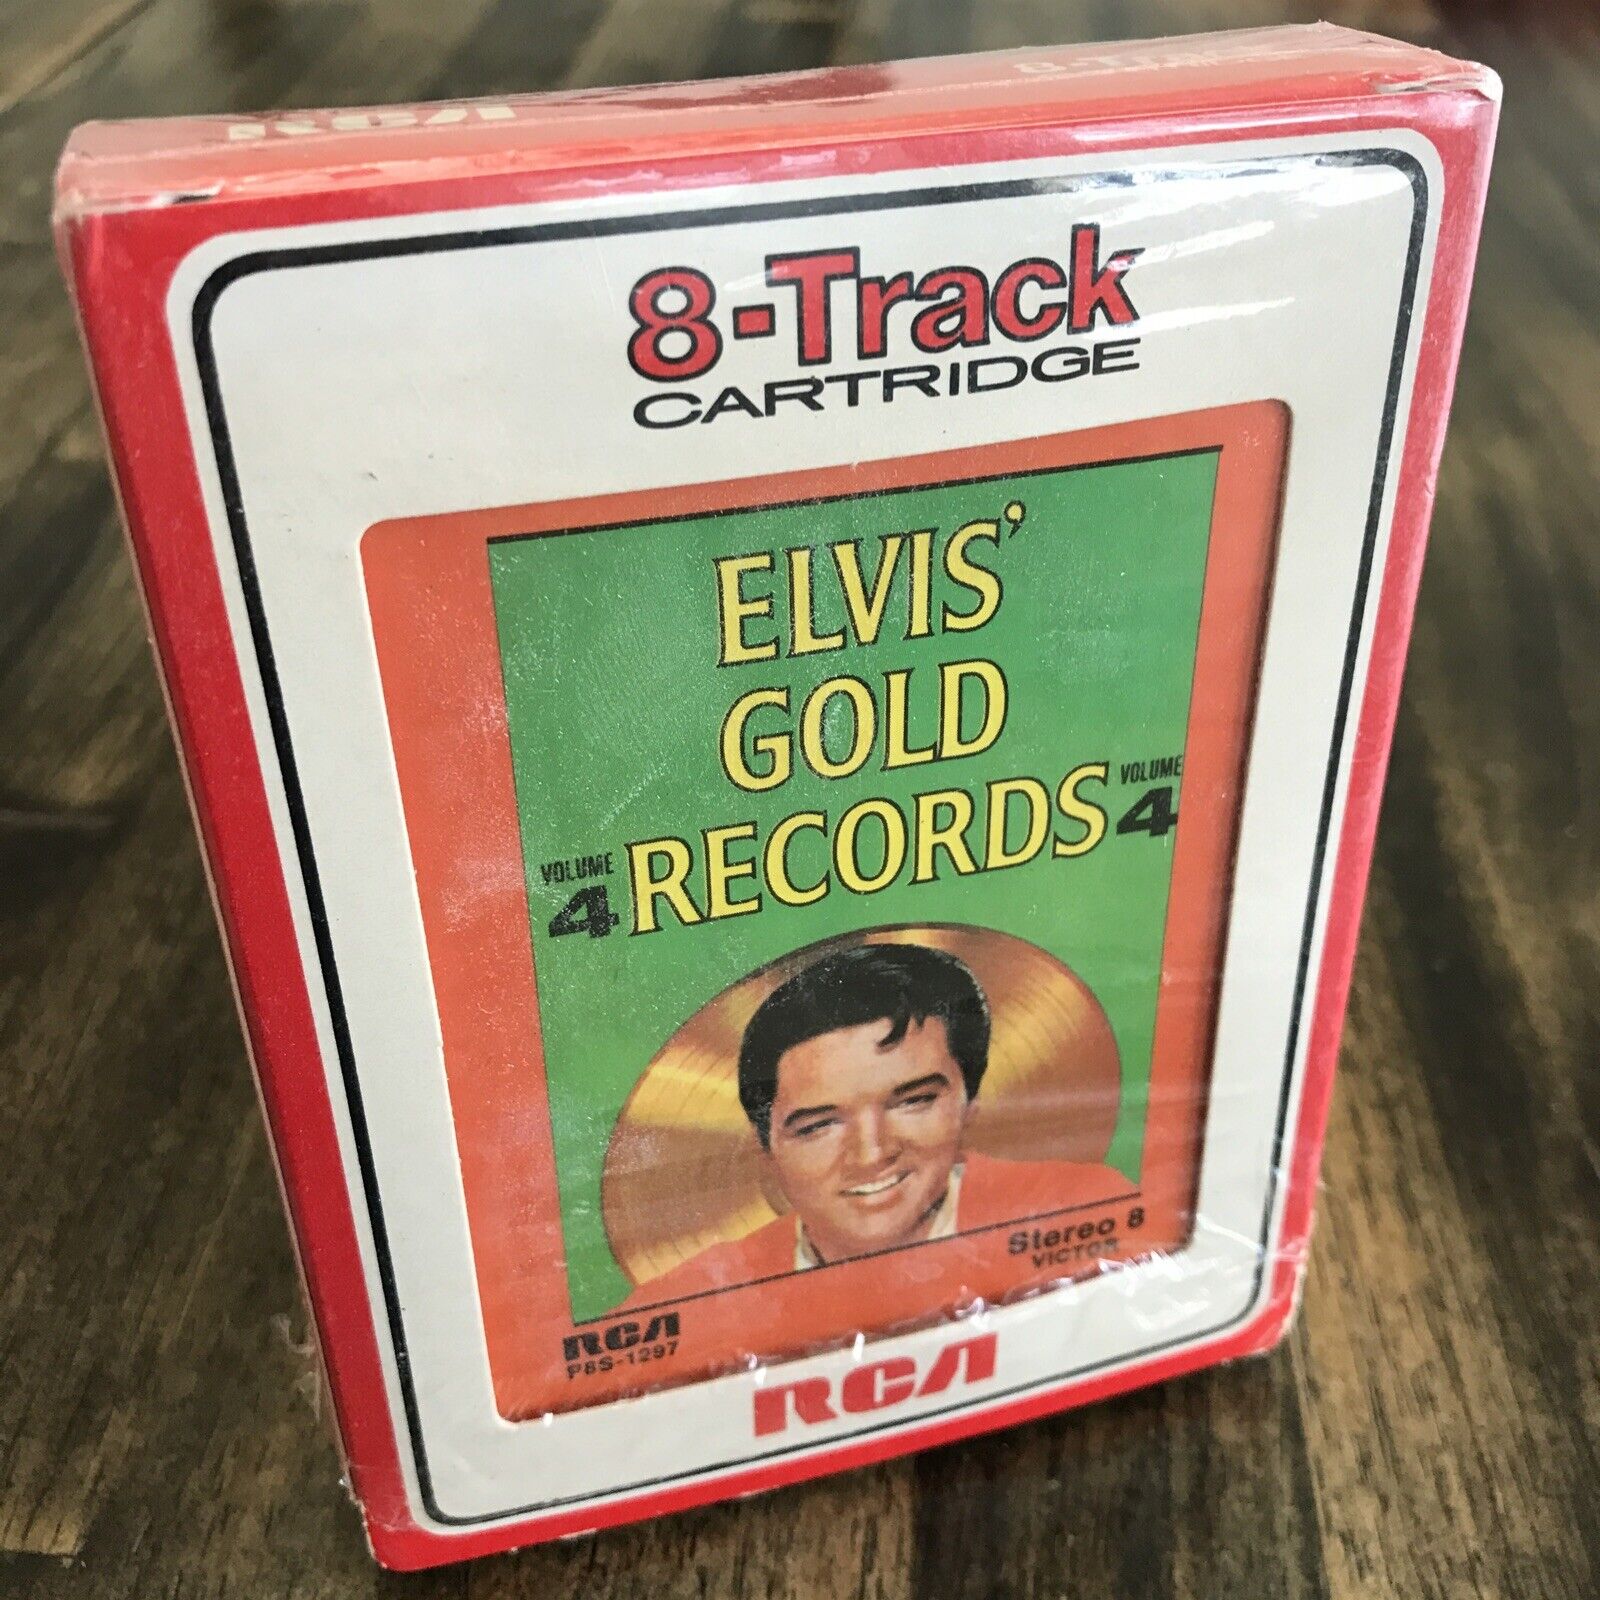 Elvis Presley Elvis’ Gold Today's only Records Vol Vic 8 Track PBS-1297 4 5% OFF RCA